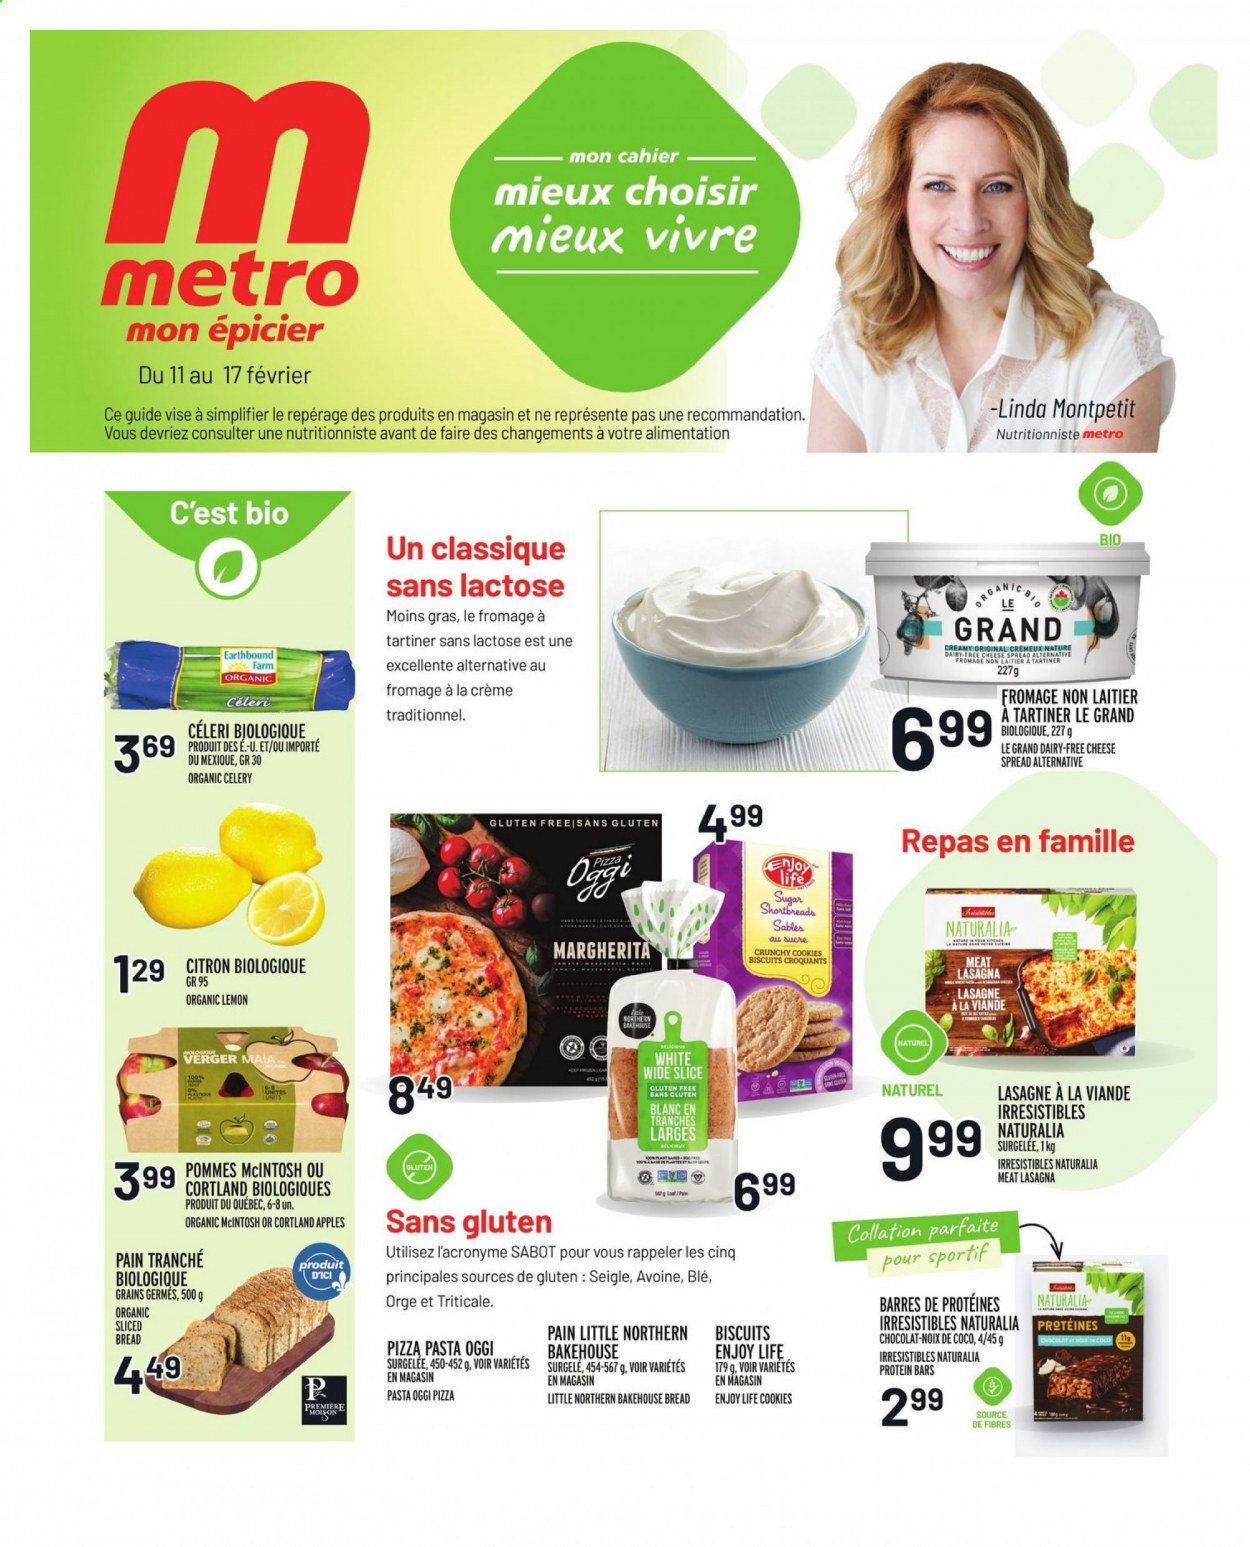 thumbnail - Metro Flyer - February 11, 2021 - February 17, 2021 - Sales products - bread, celery, apples, pizza, pasta, lasagna meal, cheese spread, cookies, biscuit, sugar, protein bar, PREMIERE. Page 1.